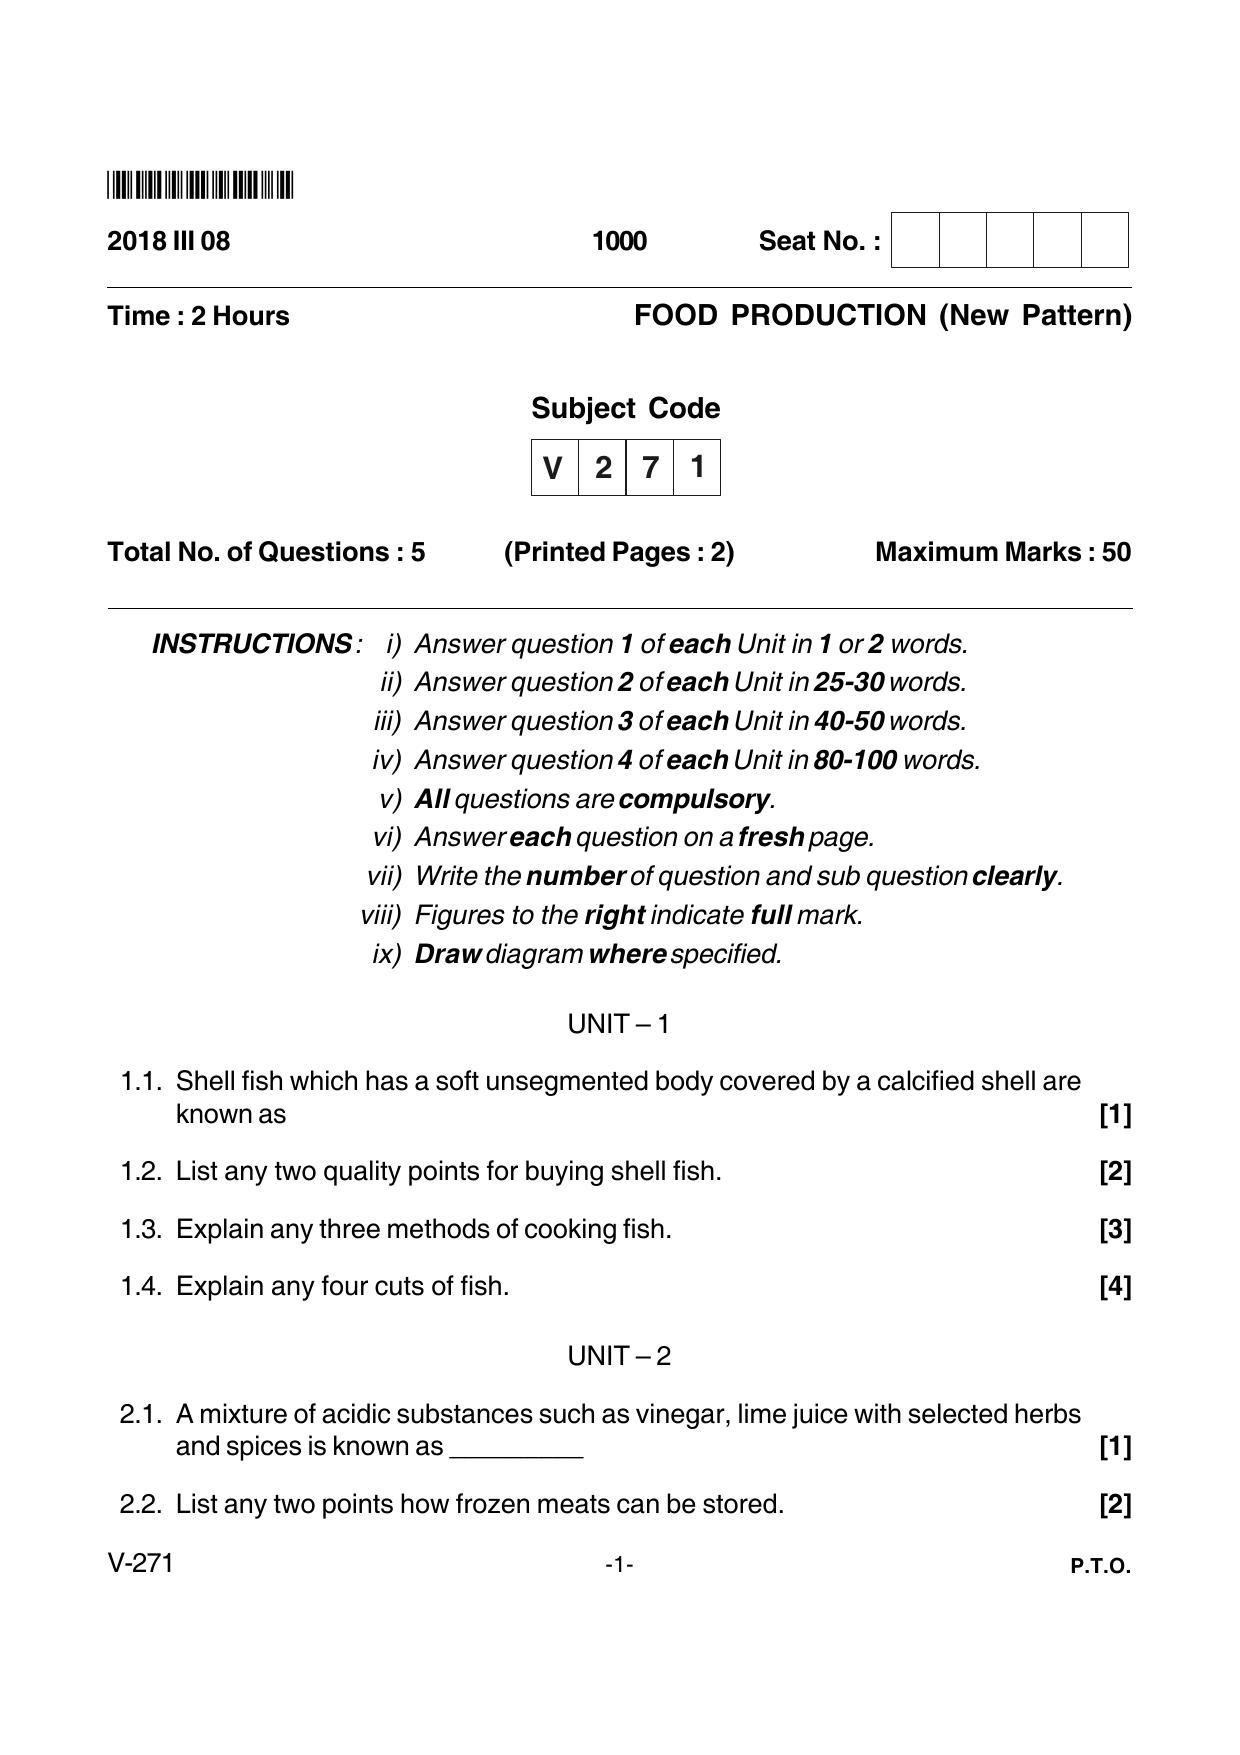 Goa Board Class 12 Food Production  Voc 271 New Pattern (March 2018) Question Paper - Page 1